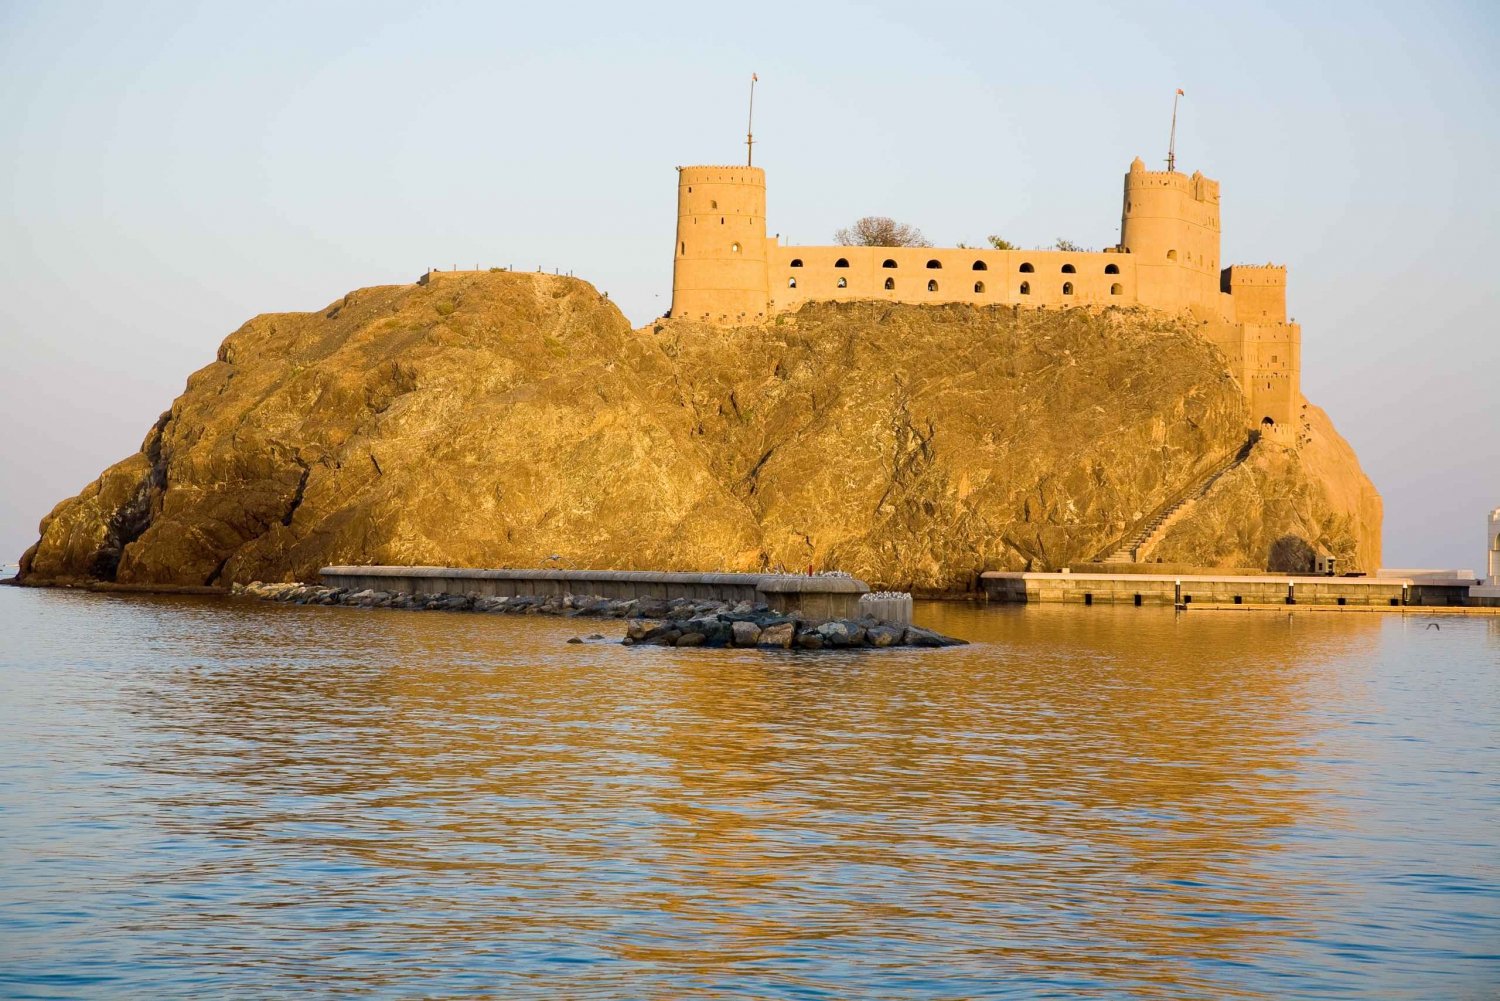 Muscat: Full Day Boat Trip, Dolphin Watching, & Snorkeling